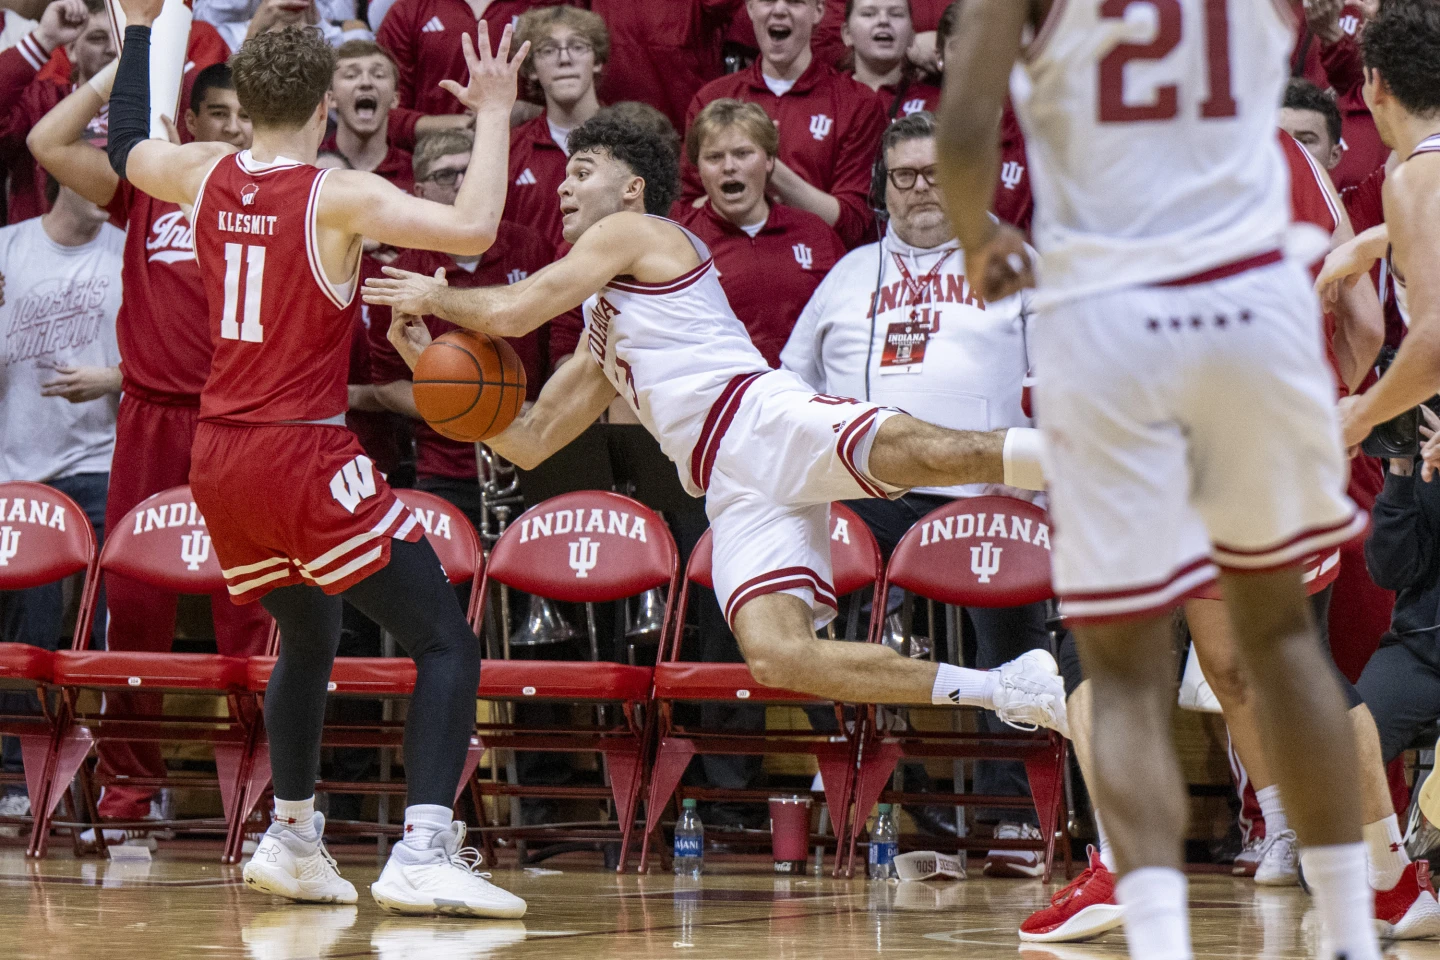 Ware helps Indiana outlast Wisconsin, in game delayed by second half fire alarm